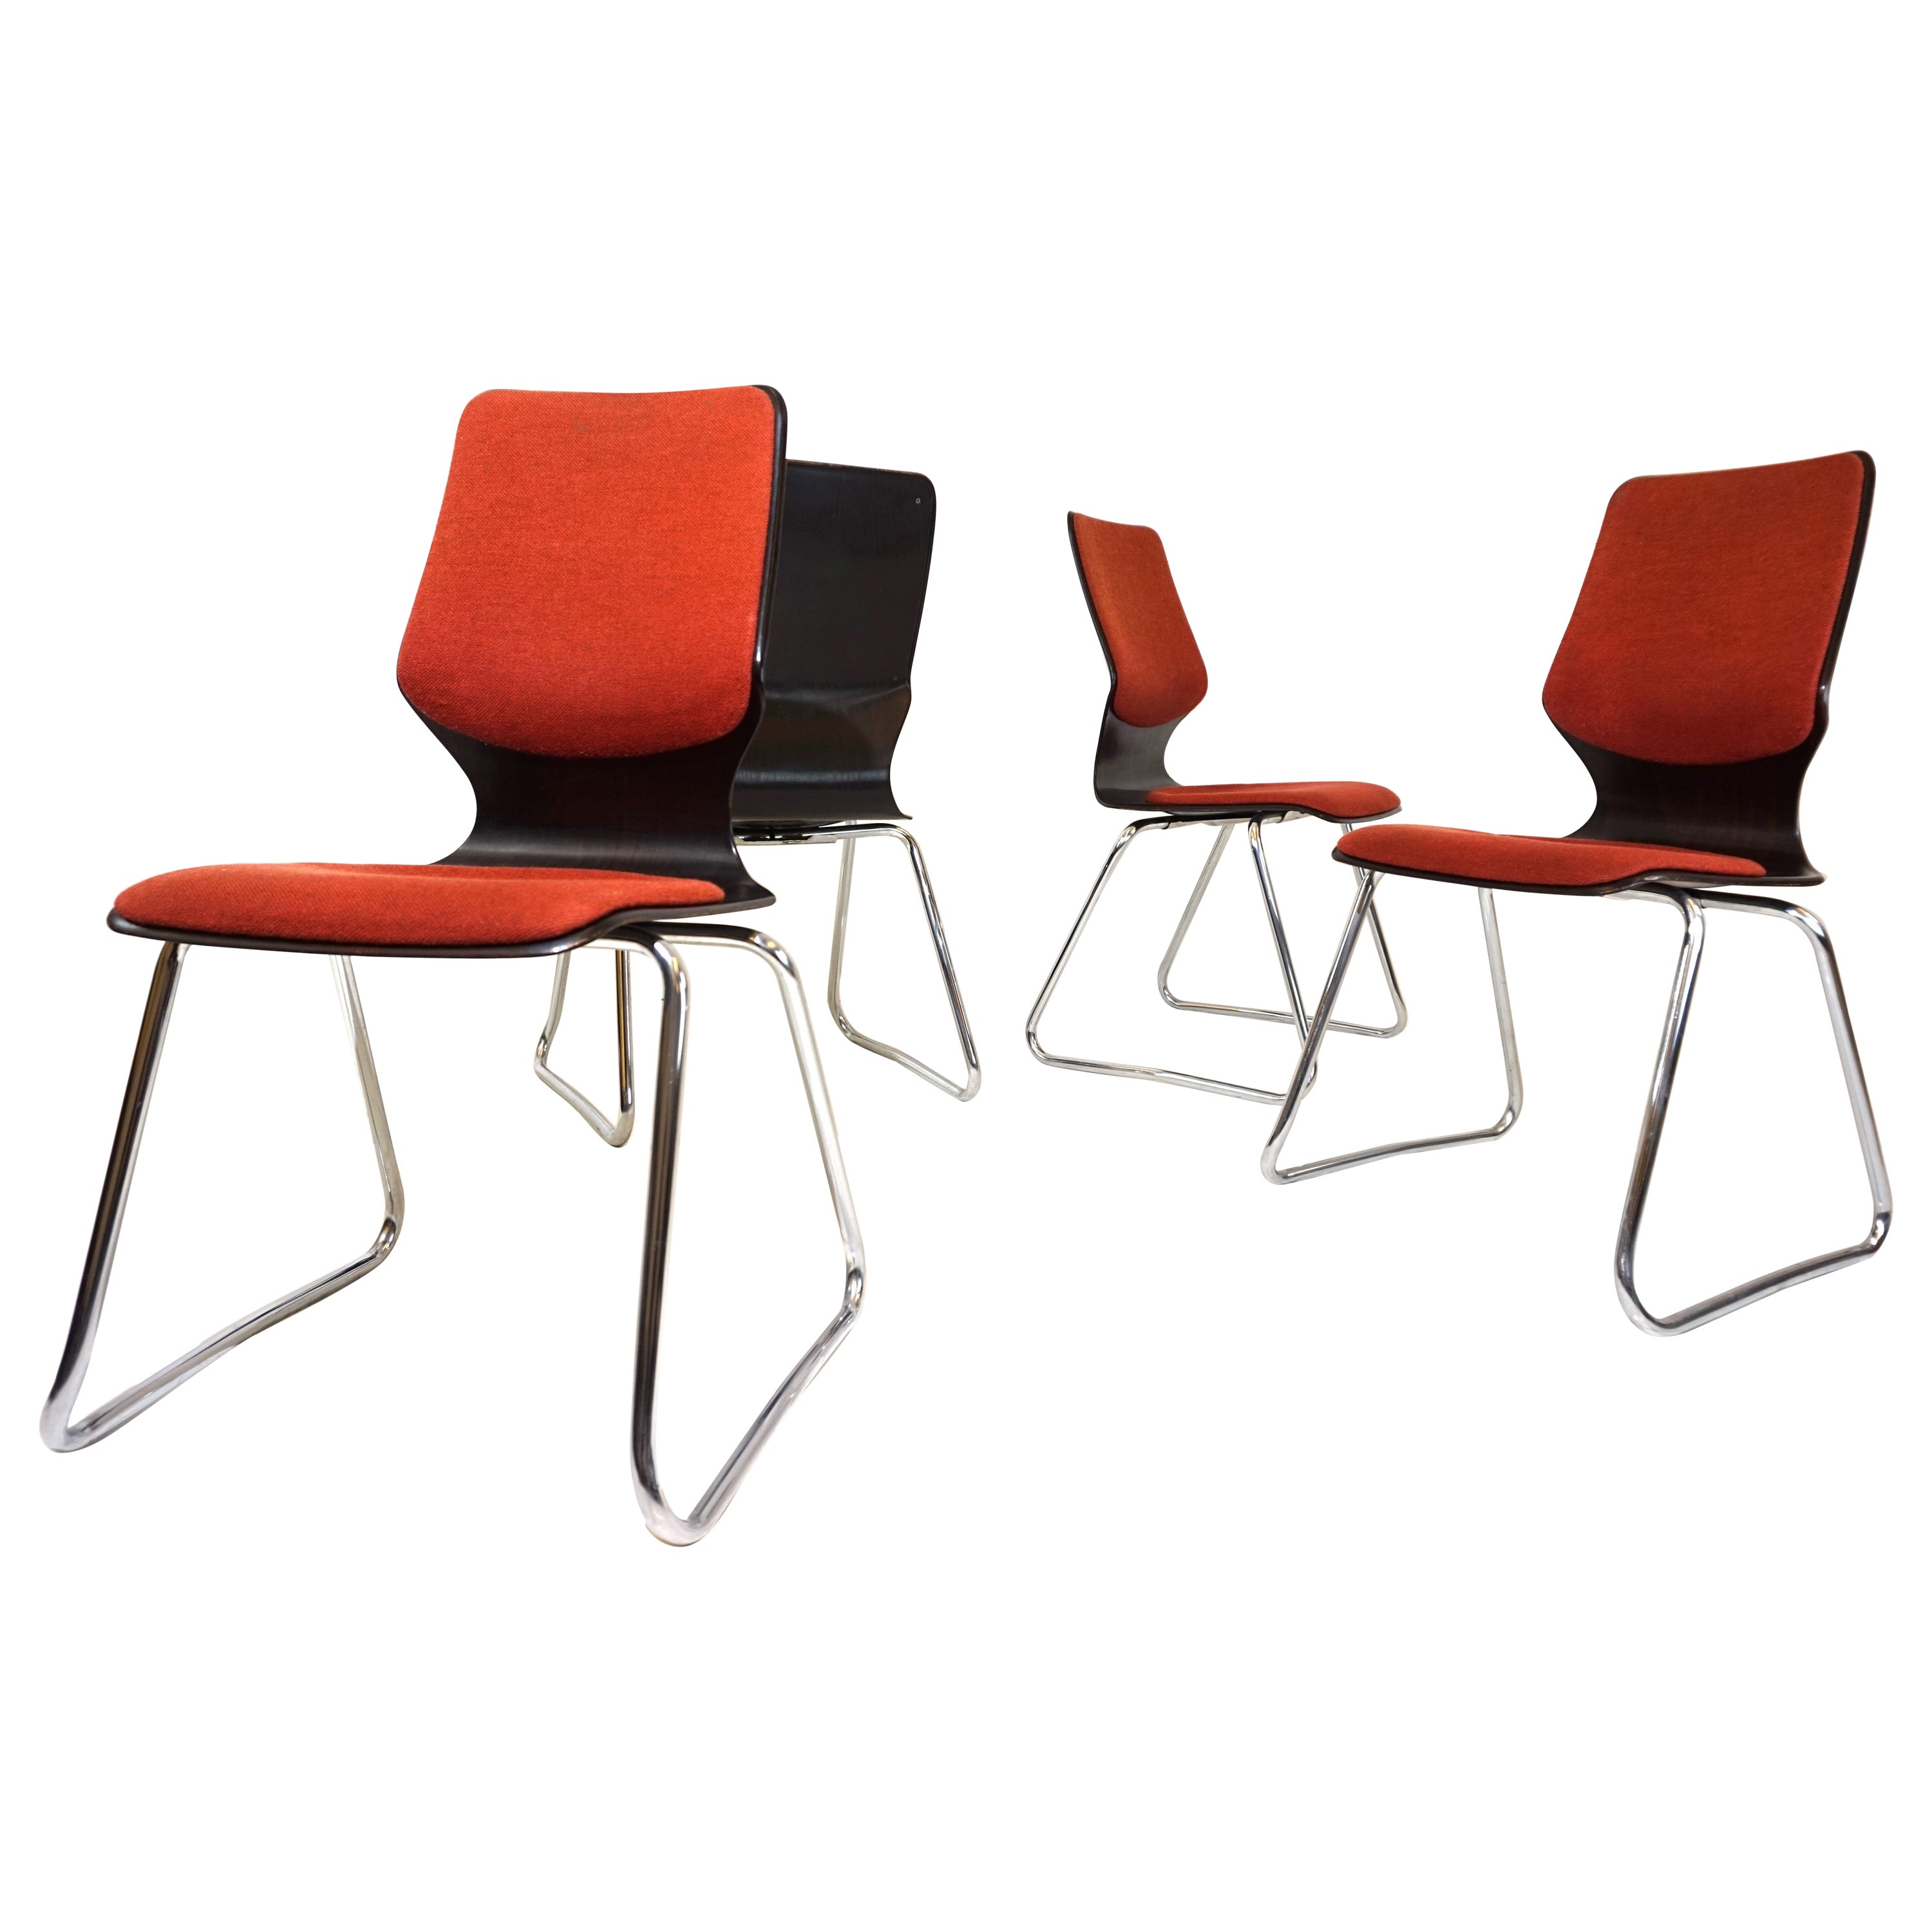 Flötotto set of 4 Pagholz chairs by Elmar Flötotto